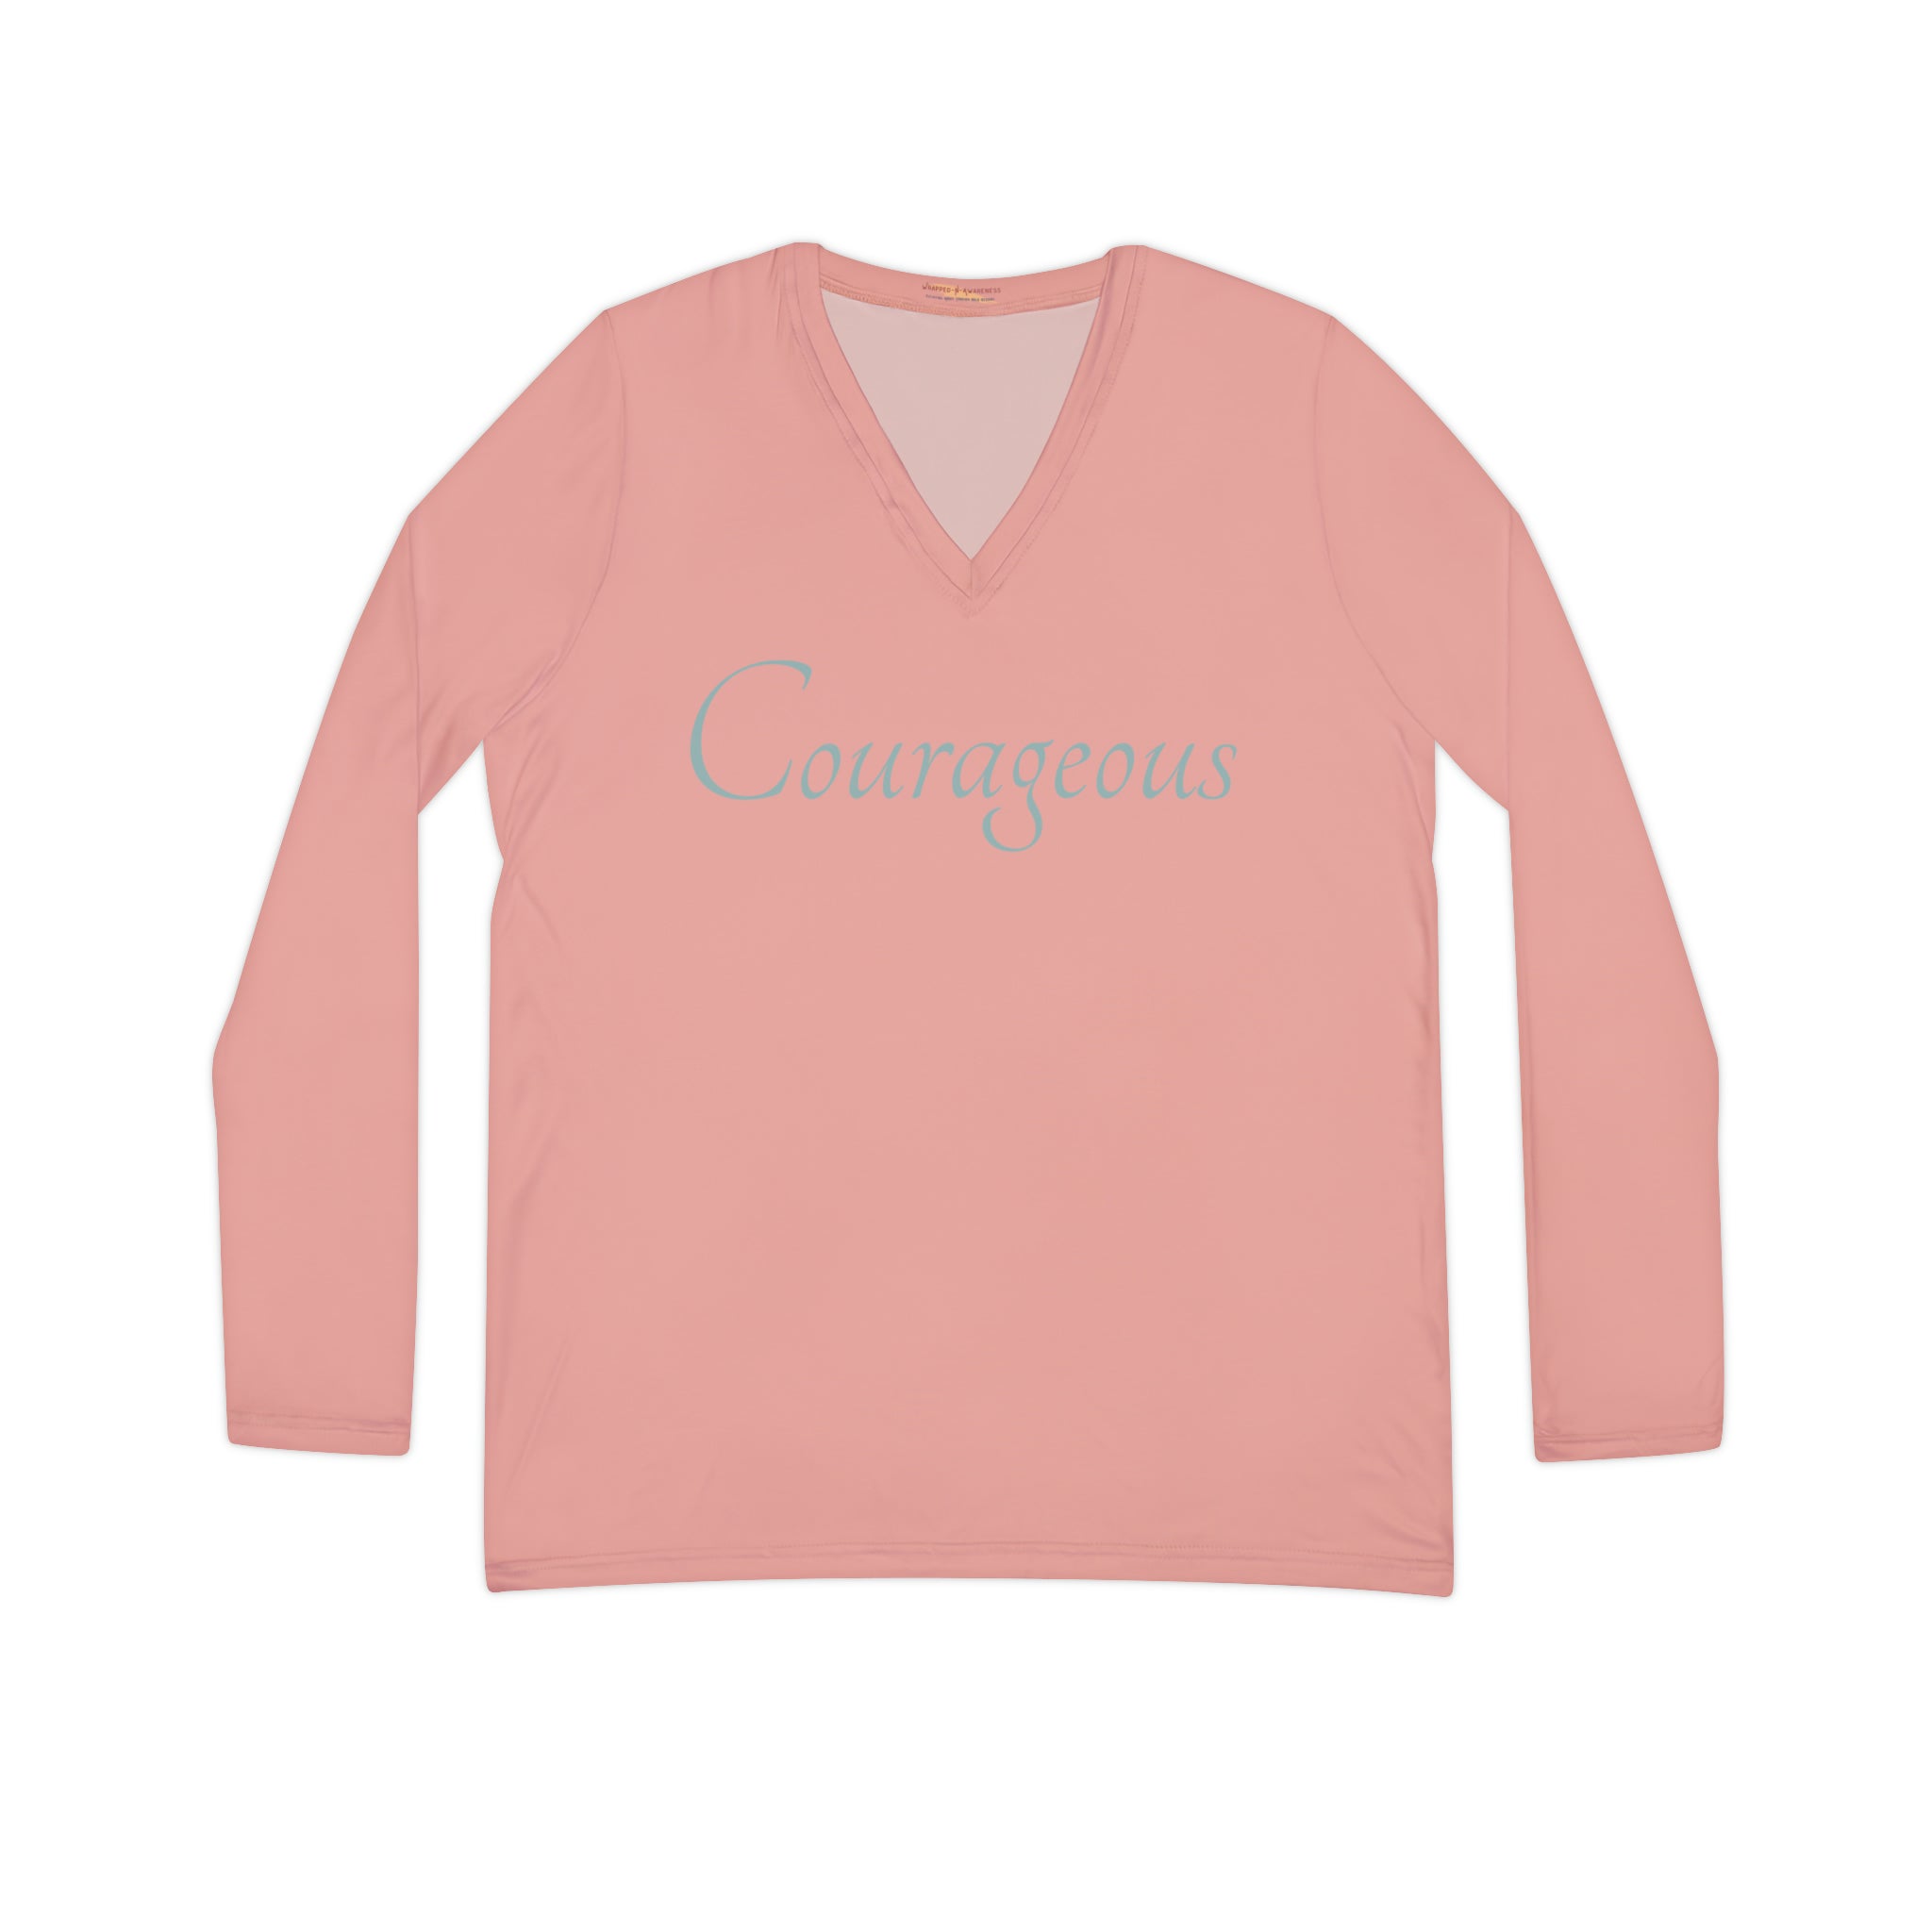 Courageous Long Sleeve V-Neck: Start Conversations Casual Shirt Double Needle Stitching Everyday Wear Mental Health Donation Polyester Spandex Blend Statement Shirt Strong Shirt Tee for Women All Over Prints 5010534044426709793_2048 Printify